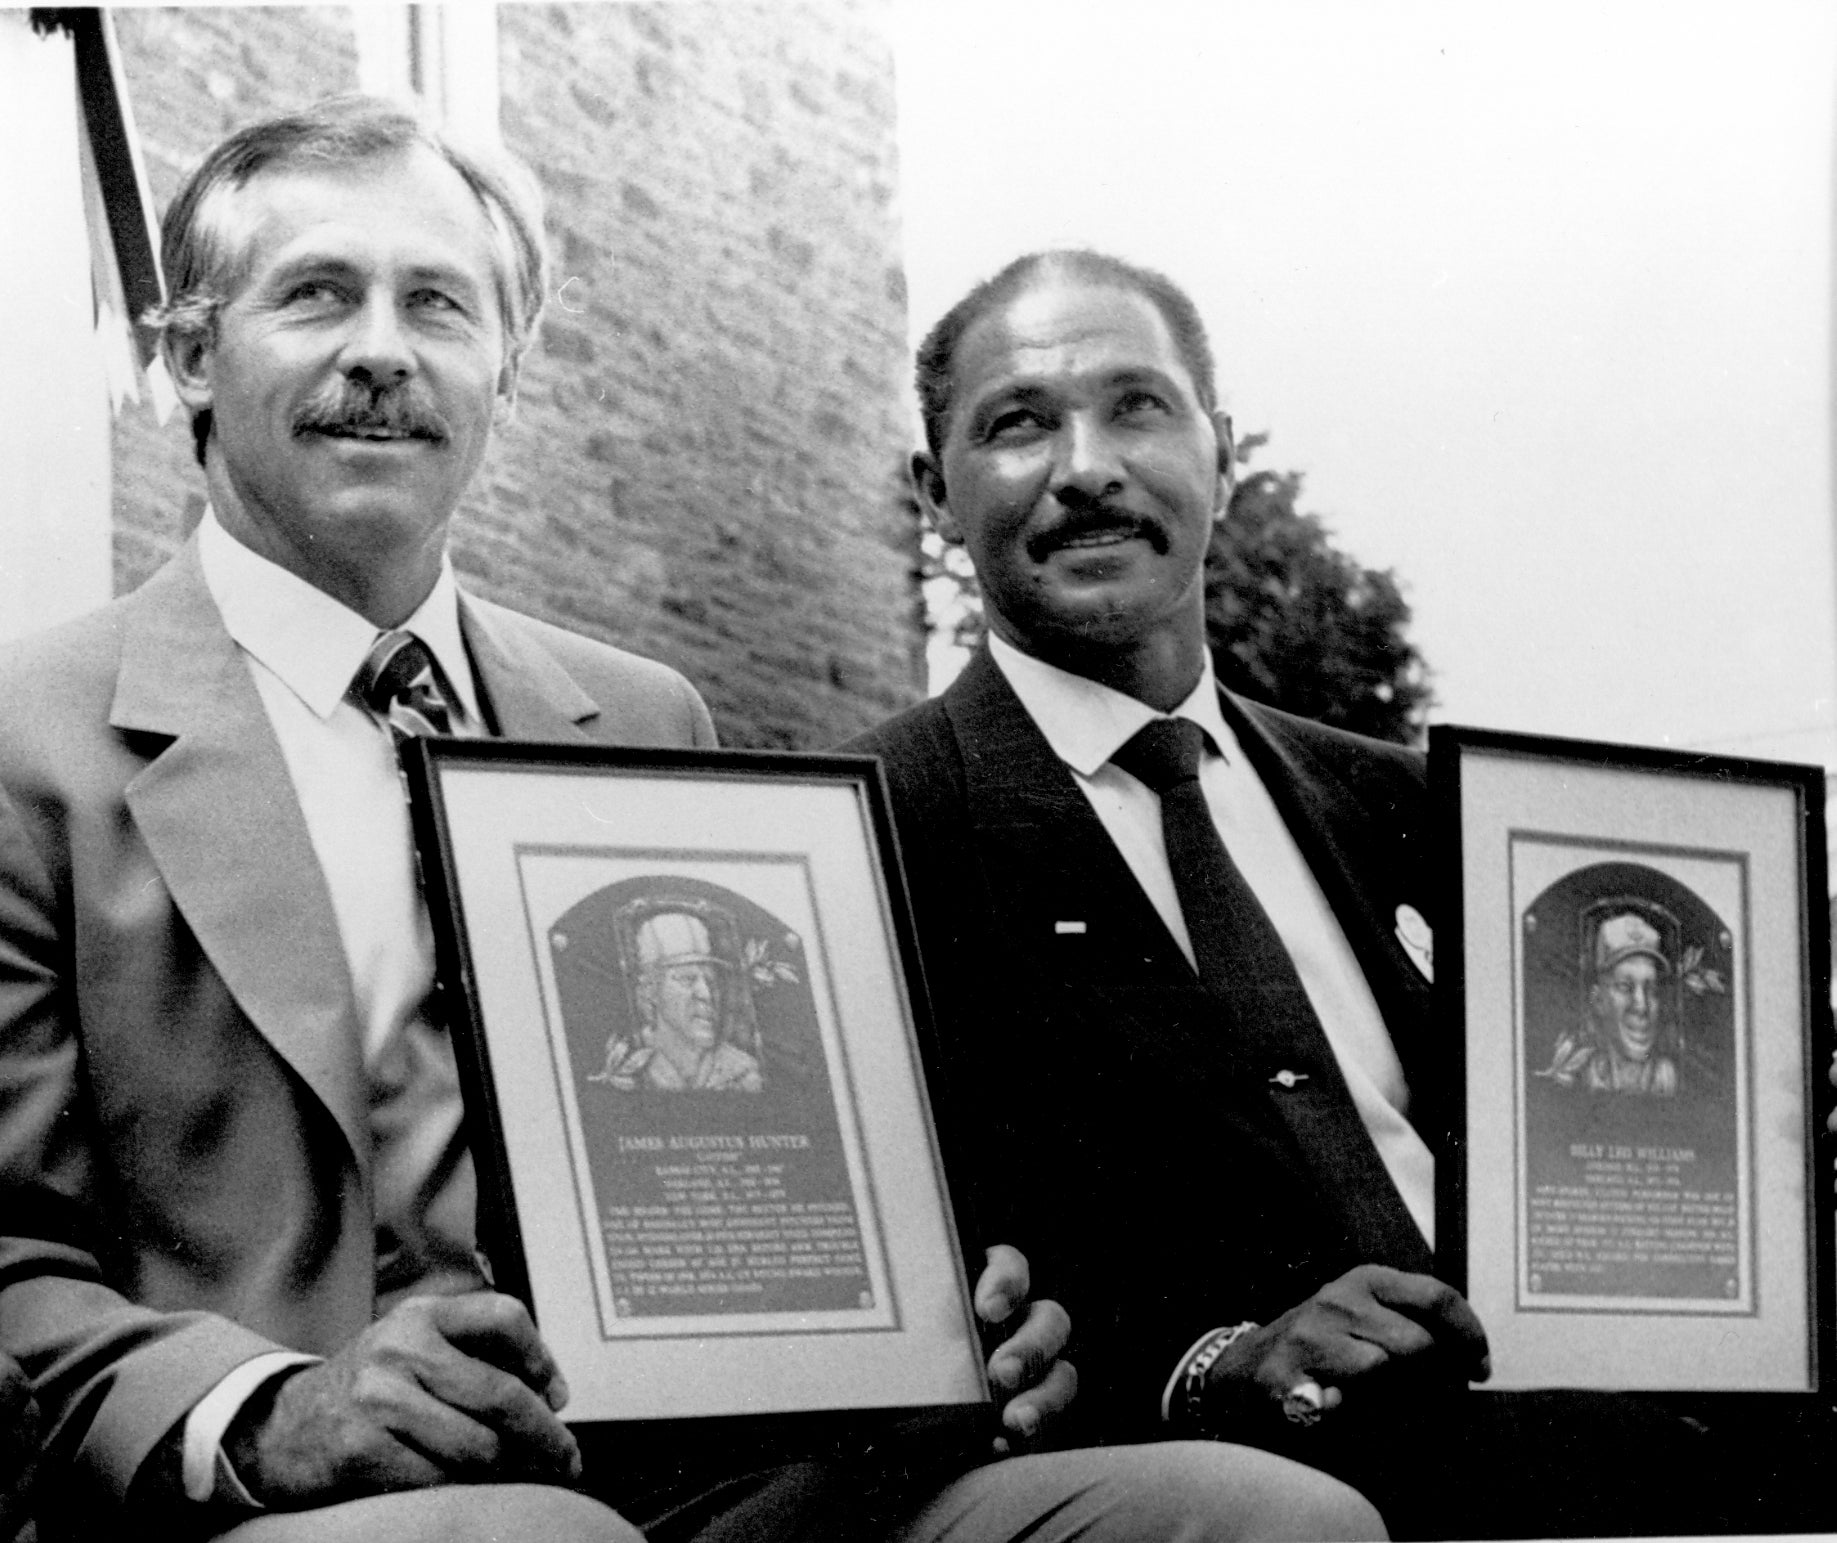 Catfish Hunter and Billy Williams elected to the Hall of Fame